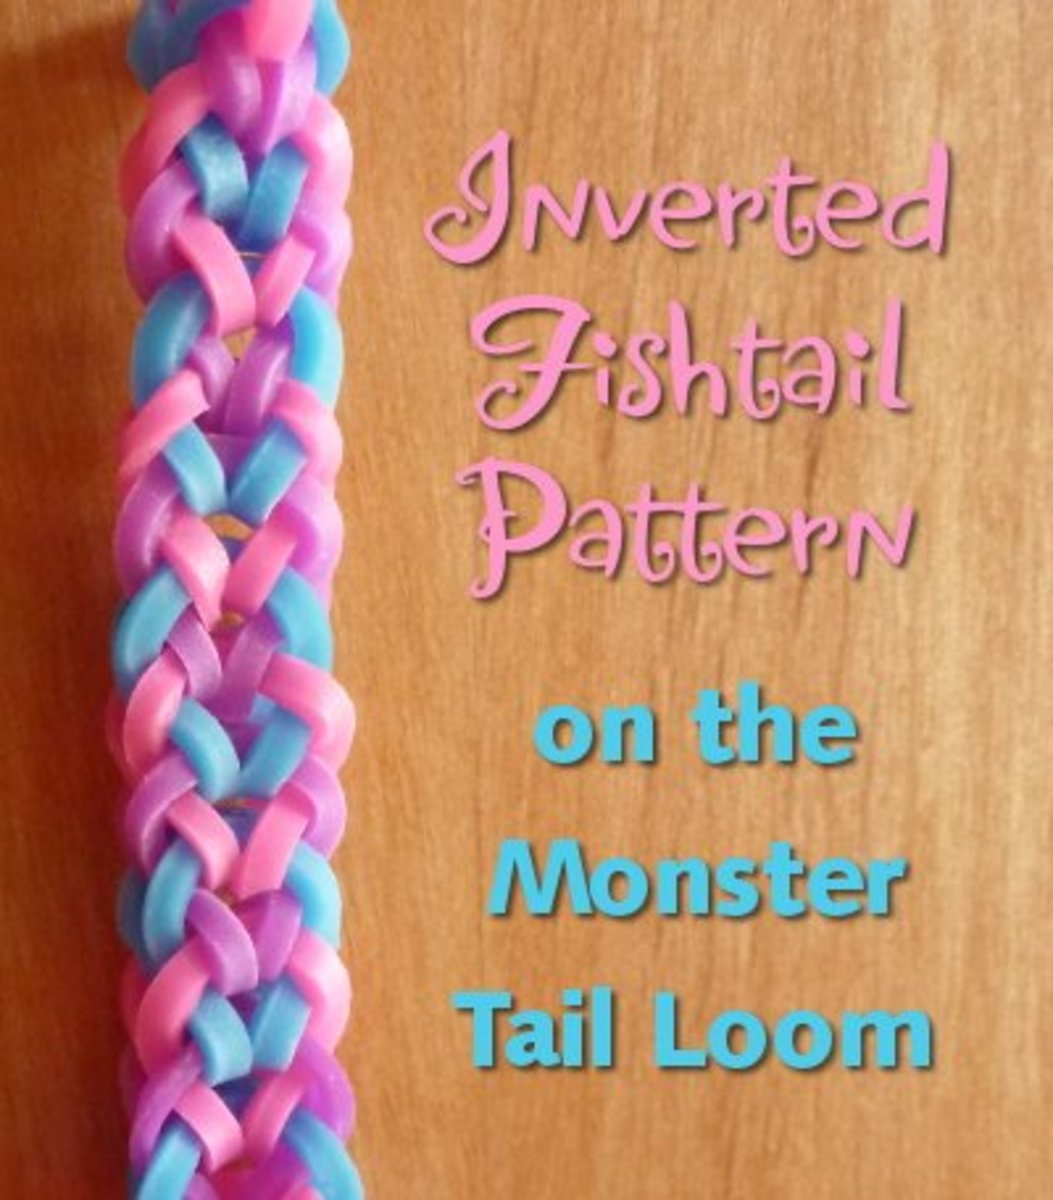 Inverted fishtail pattern on the monster tail rainbow loom